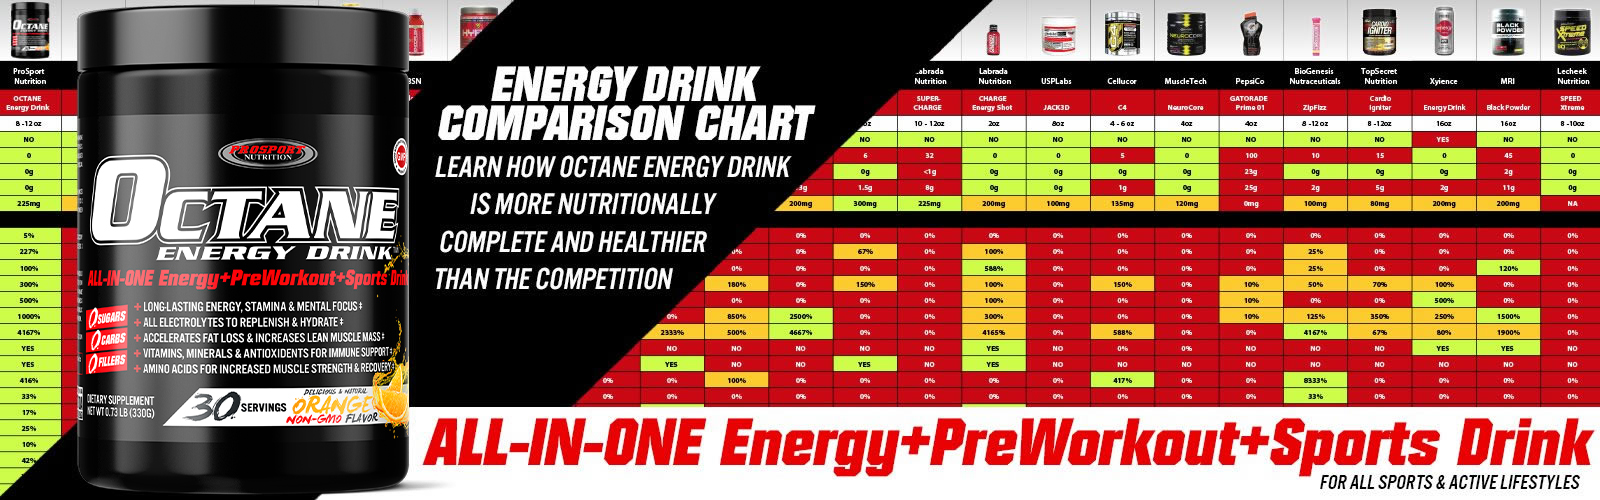 Energy Drink Price Comparison Chart